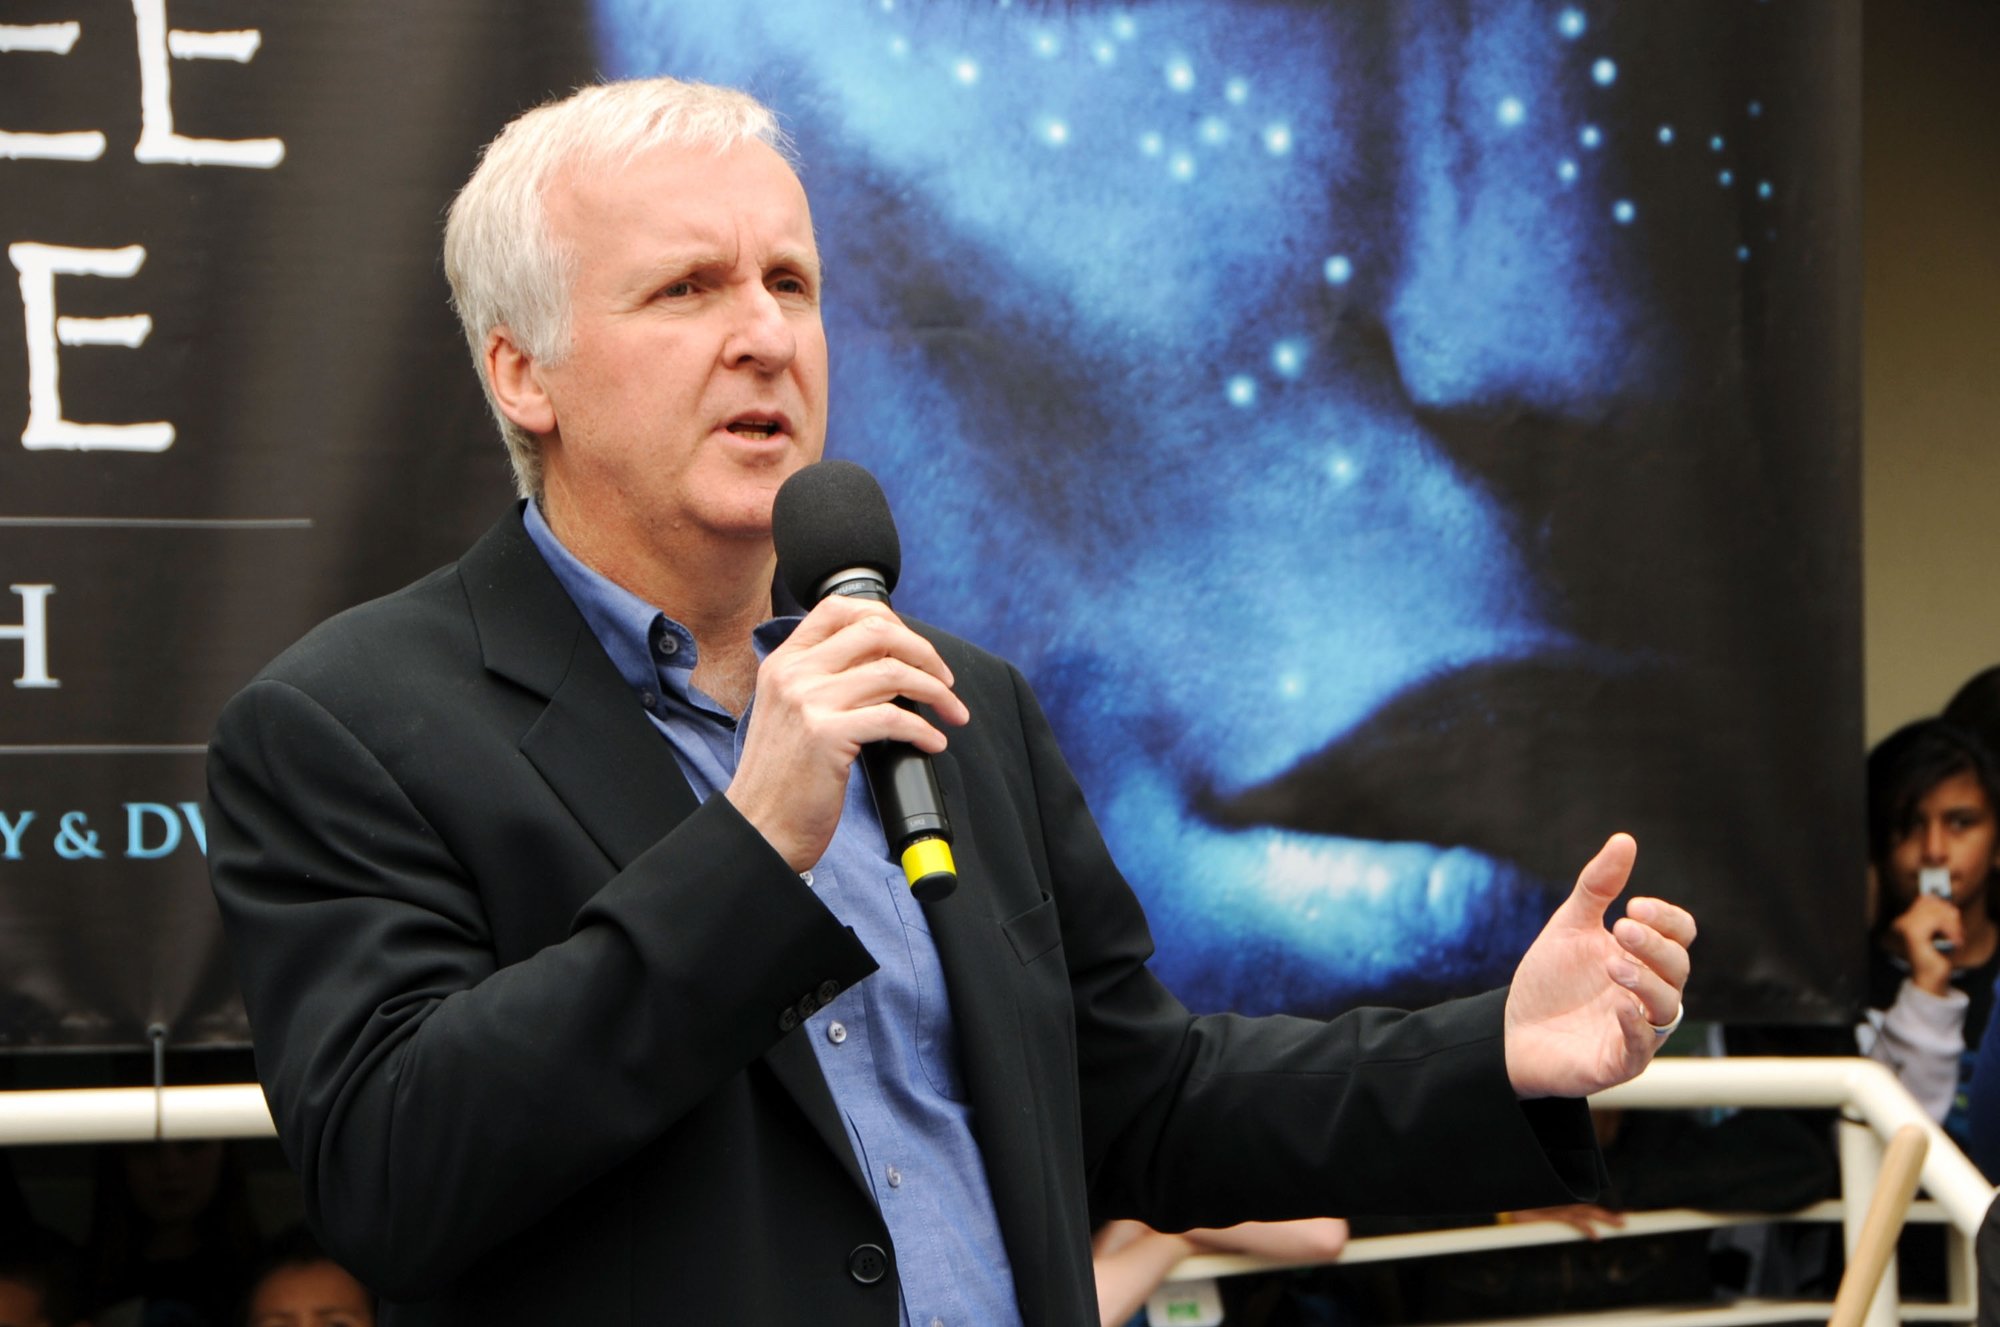 'Avatar' sequels filmmaker James Cameron speaking into a mic in front of an 'Avatar' banner